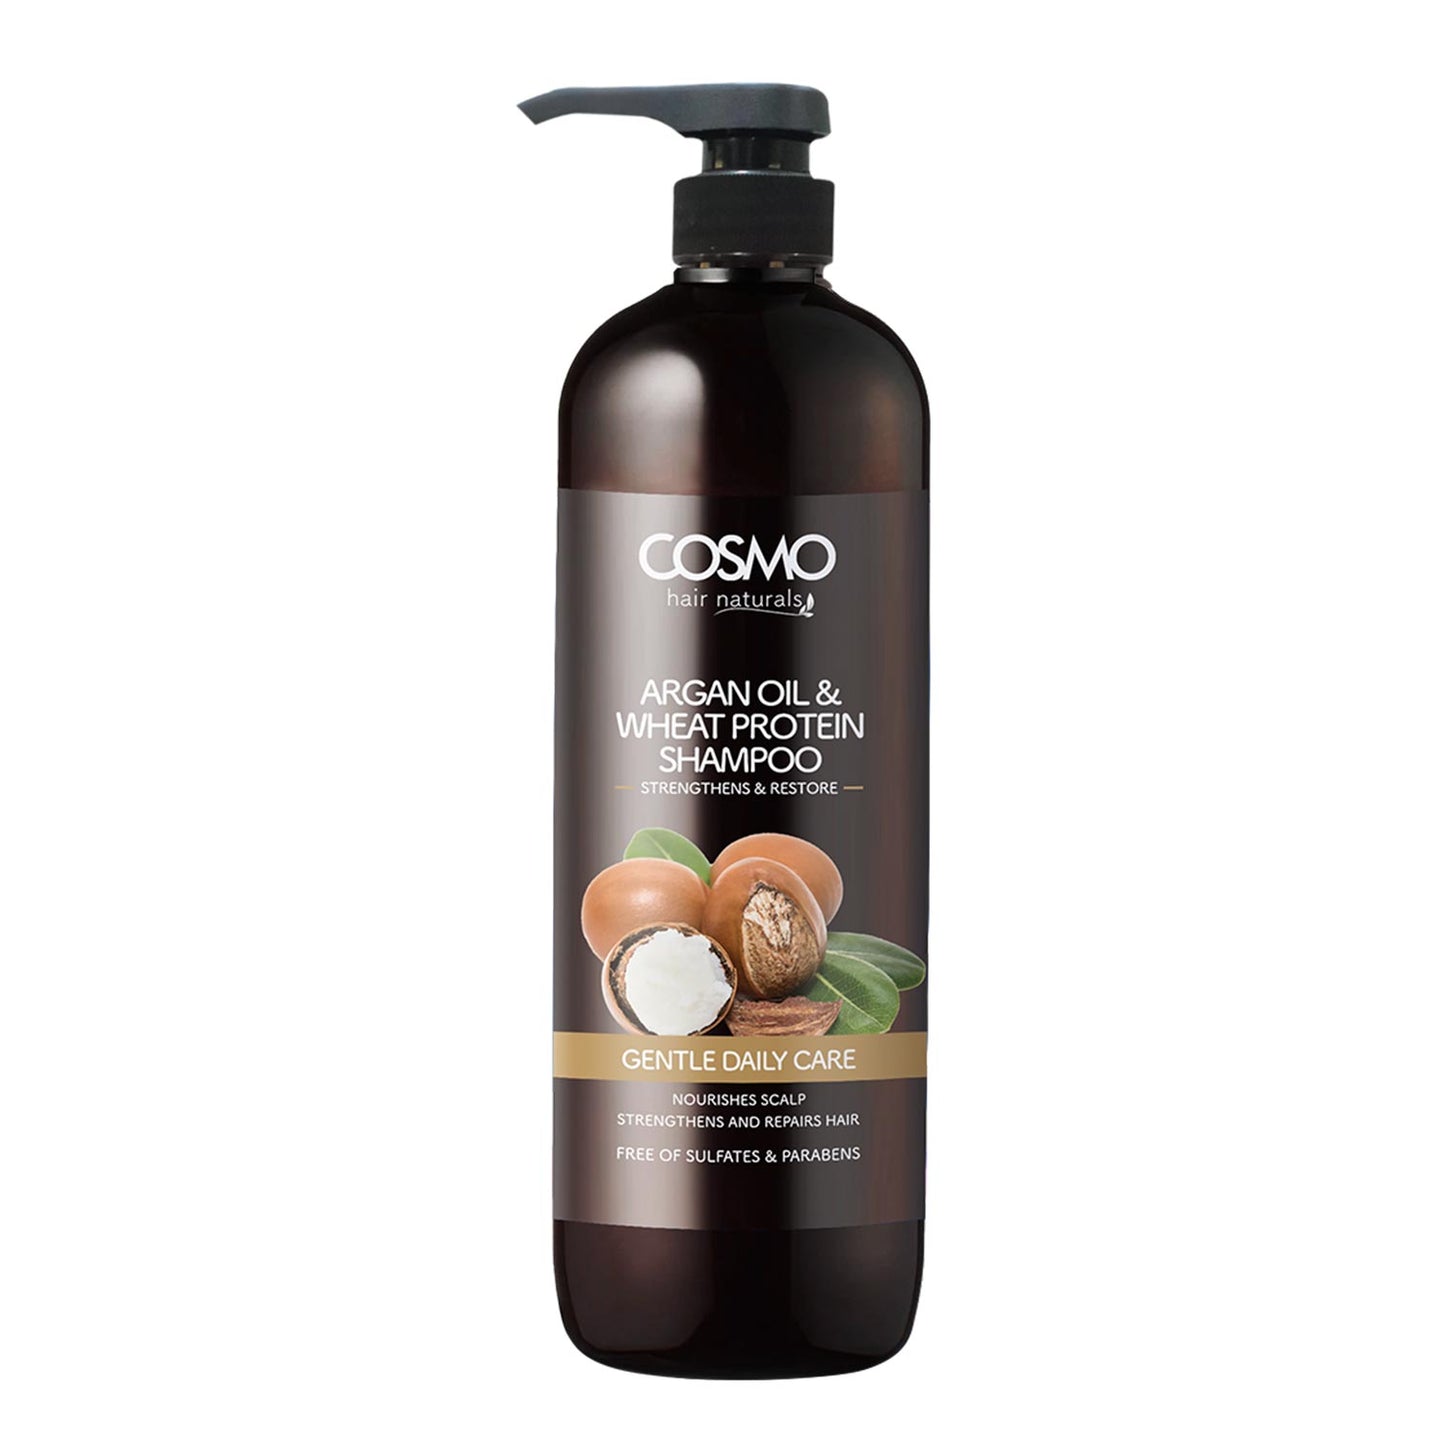 GENTLE DAILY CARE - ARGAN OIL & WHEAT PROTEIN SHAMPOO